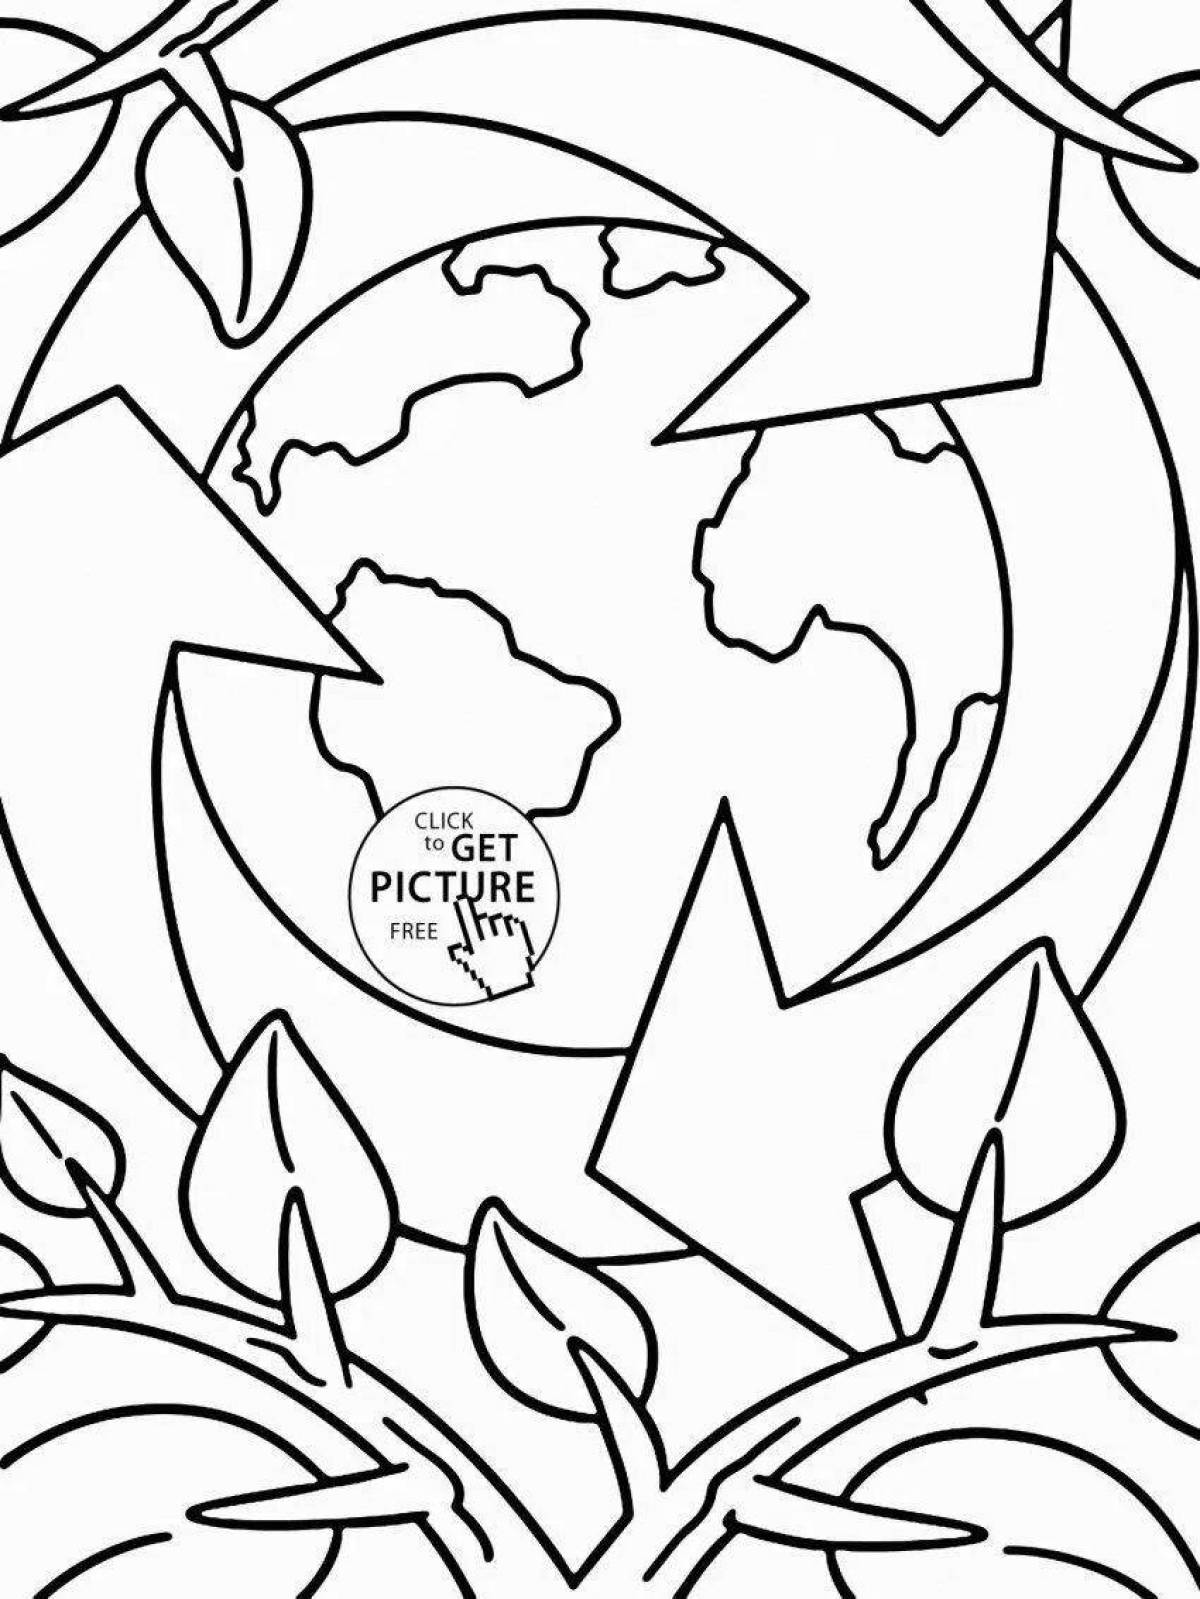 Coloring page delightful care for nature